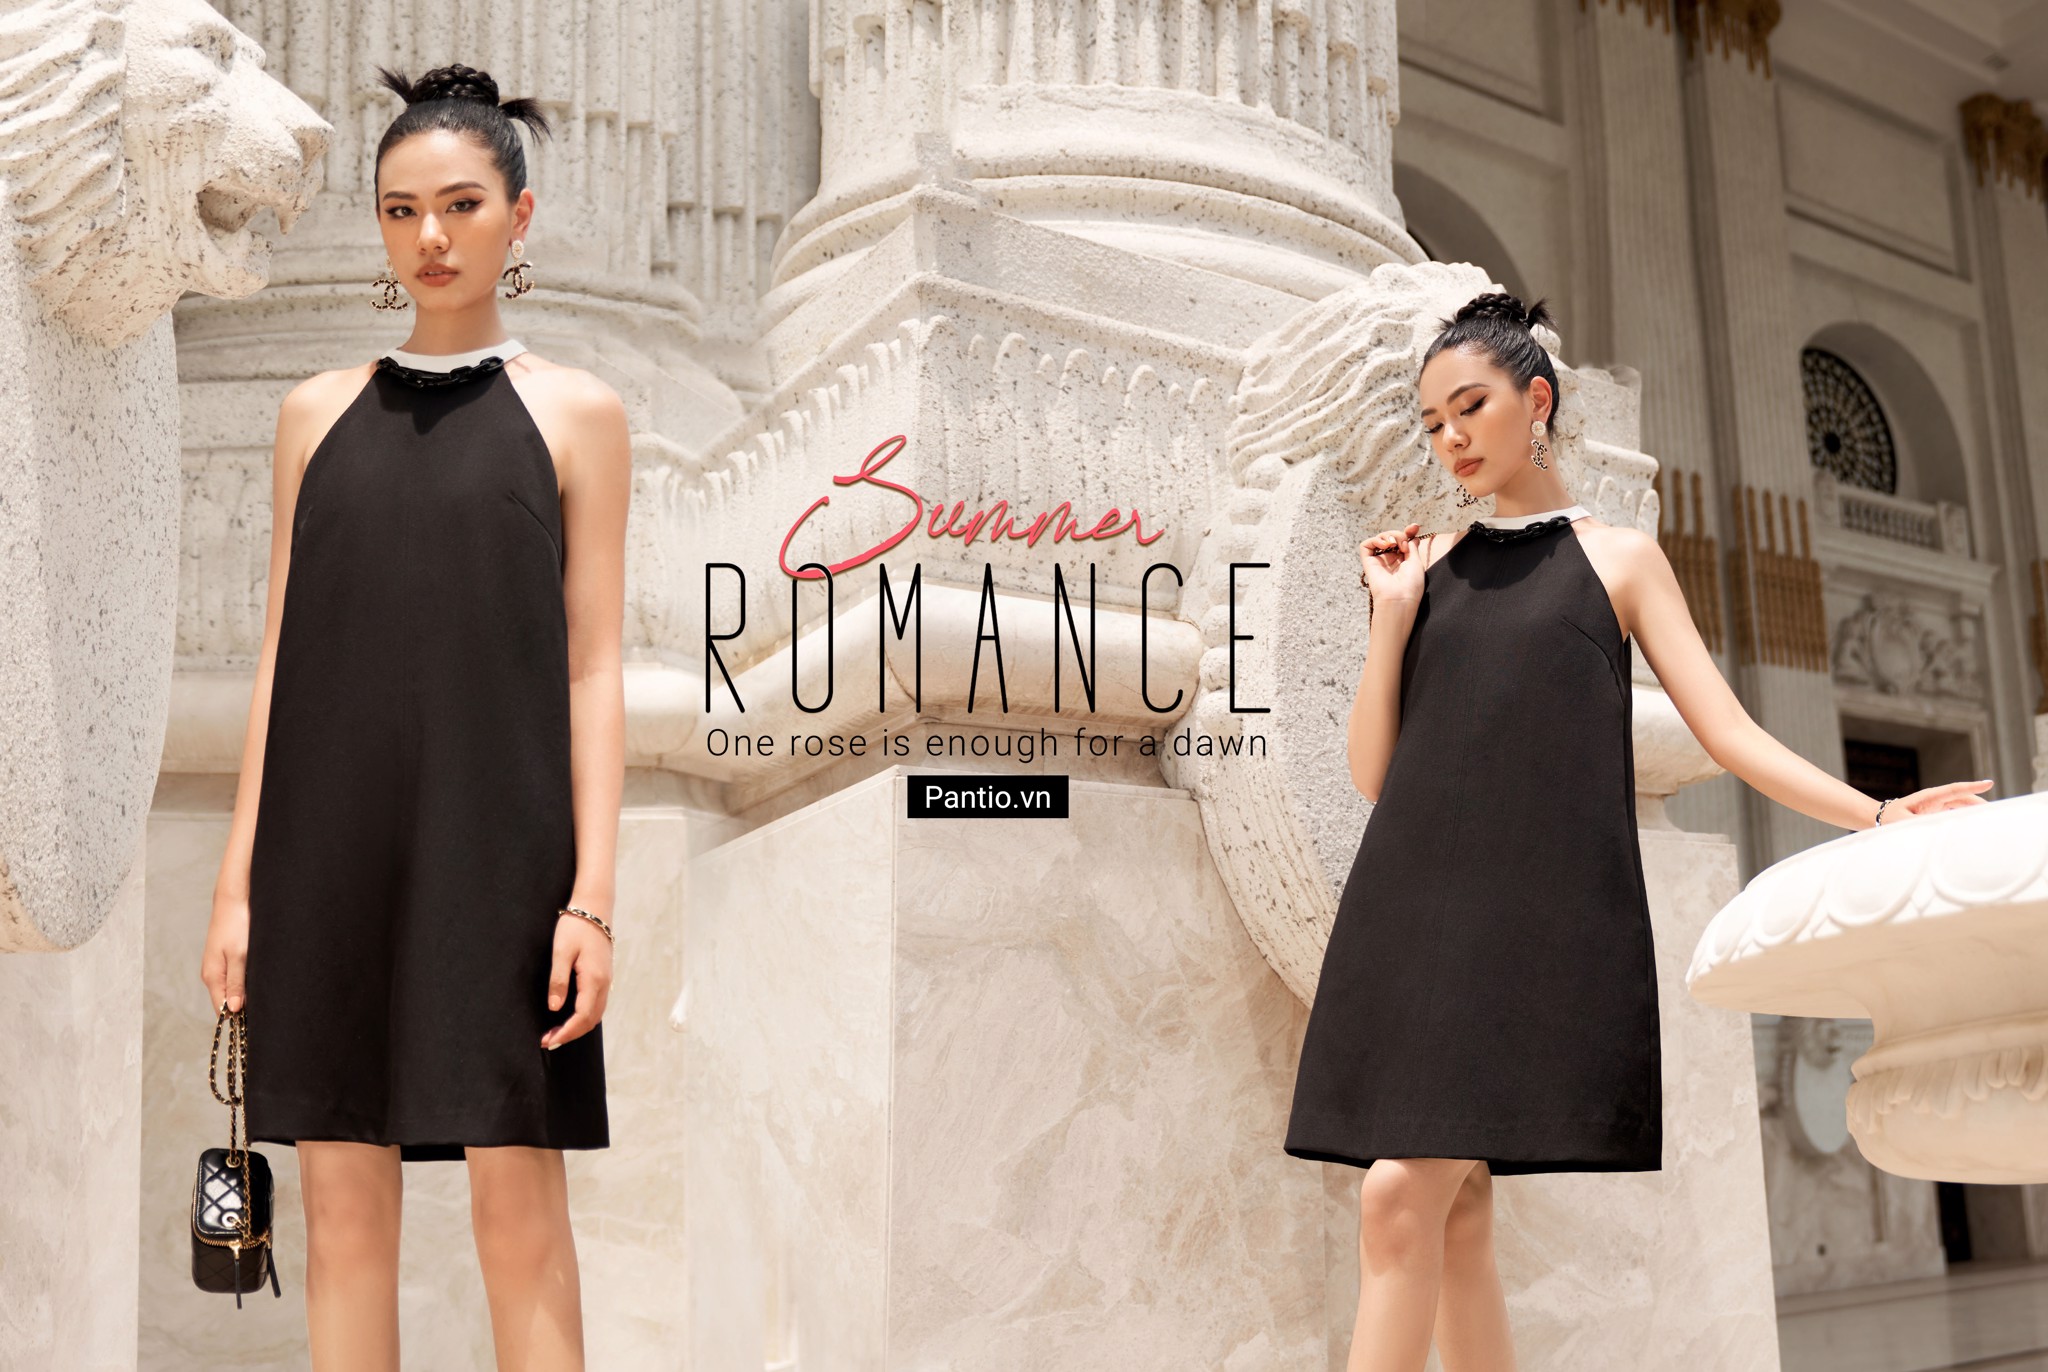 NEW COLLECTION SUMMER ROMANCE